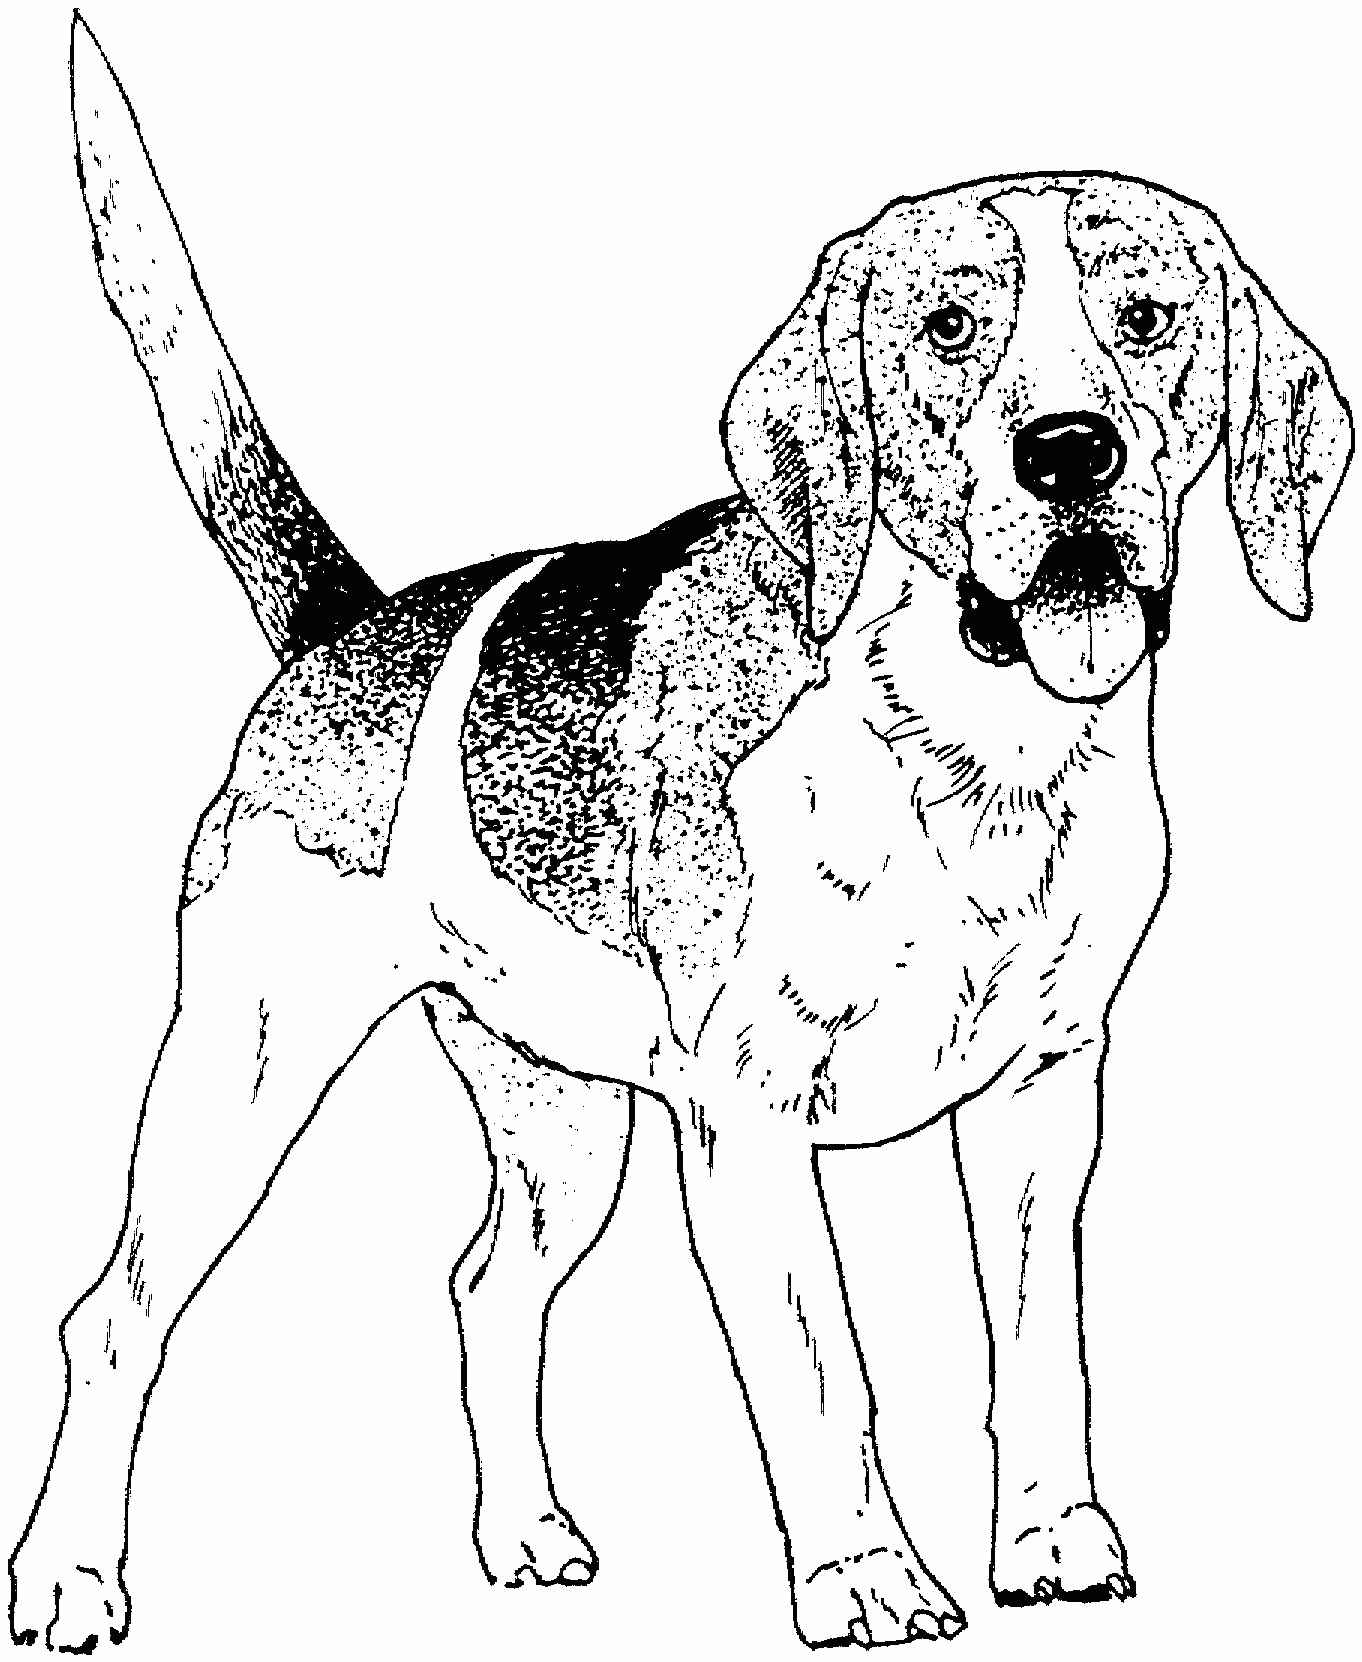 Dog Color Pages Printable | Dog Breed Coloring Pages | Dog Pic | Dog - Free Printable Dog Coloring Pages